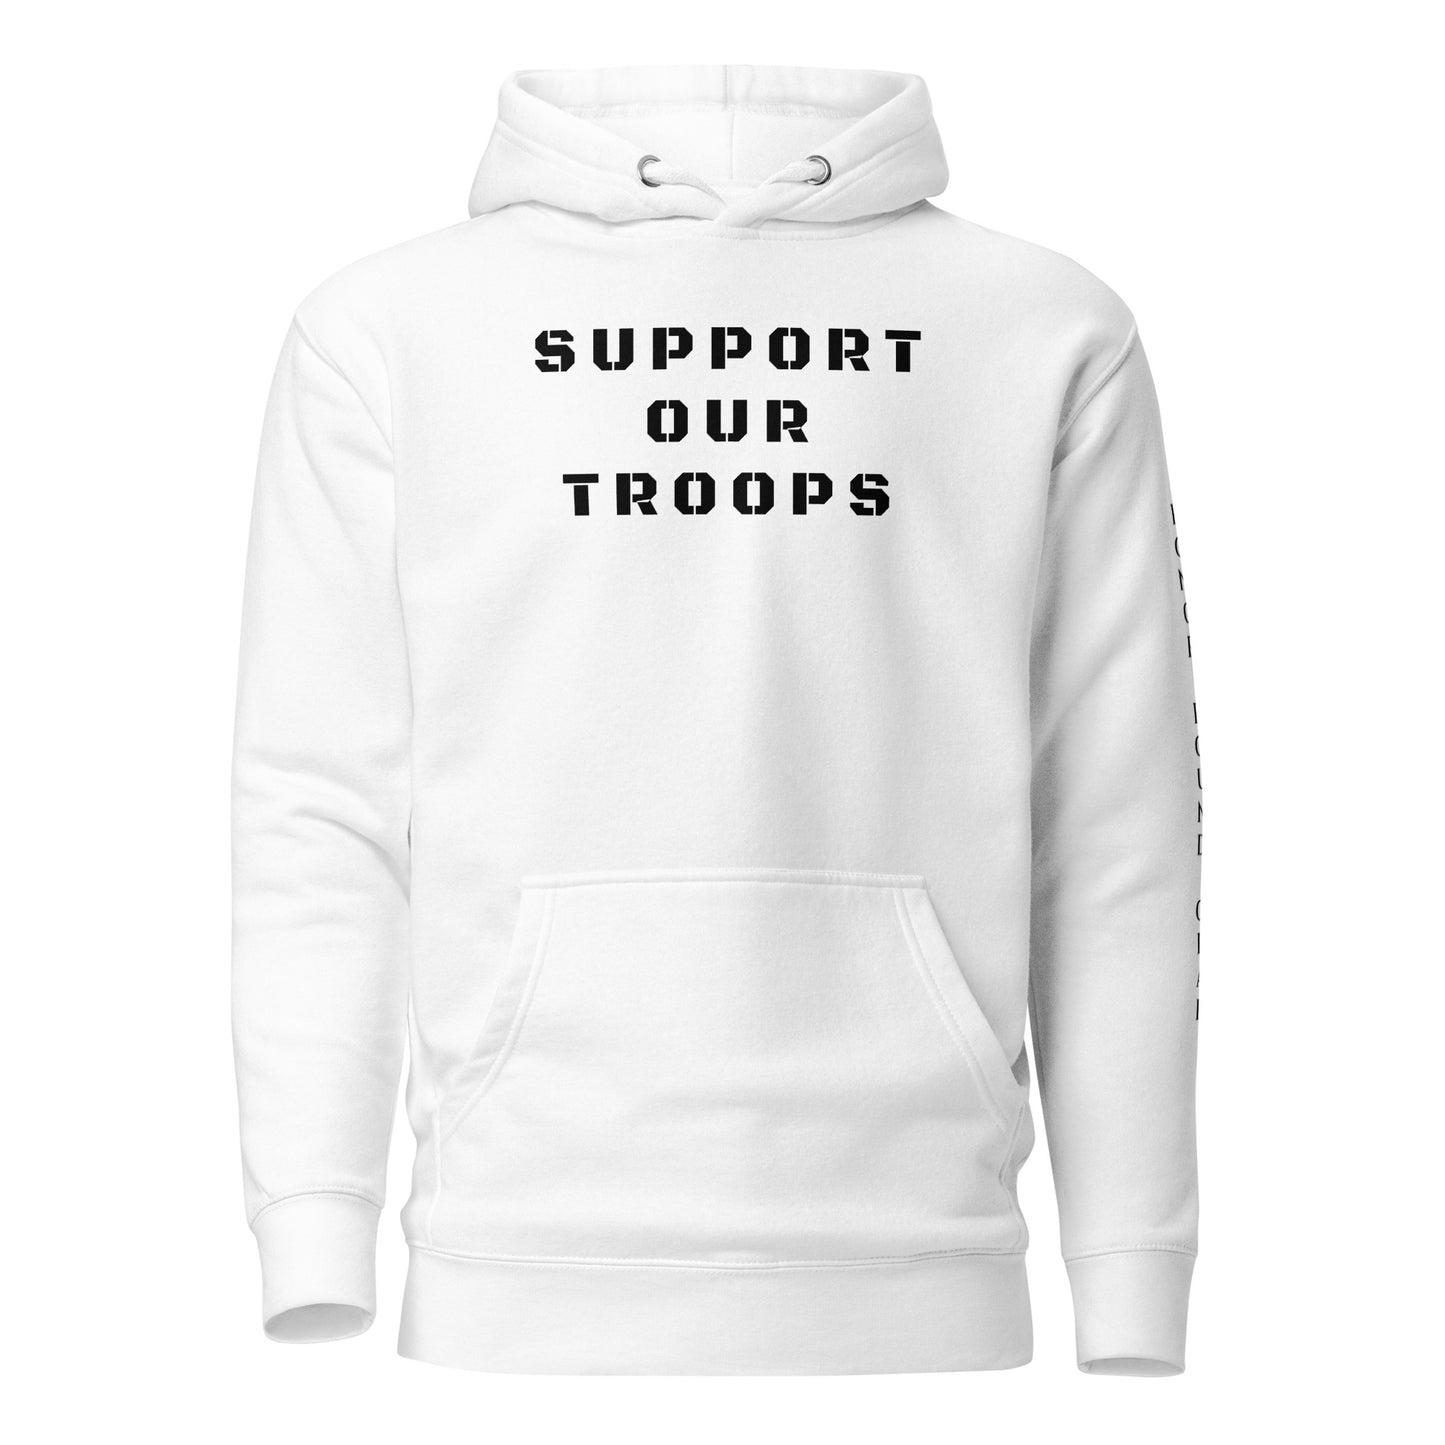 HBG "Support Our Troops" Unisex Hoodie